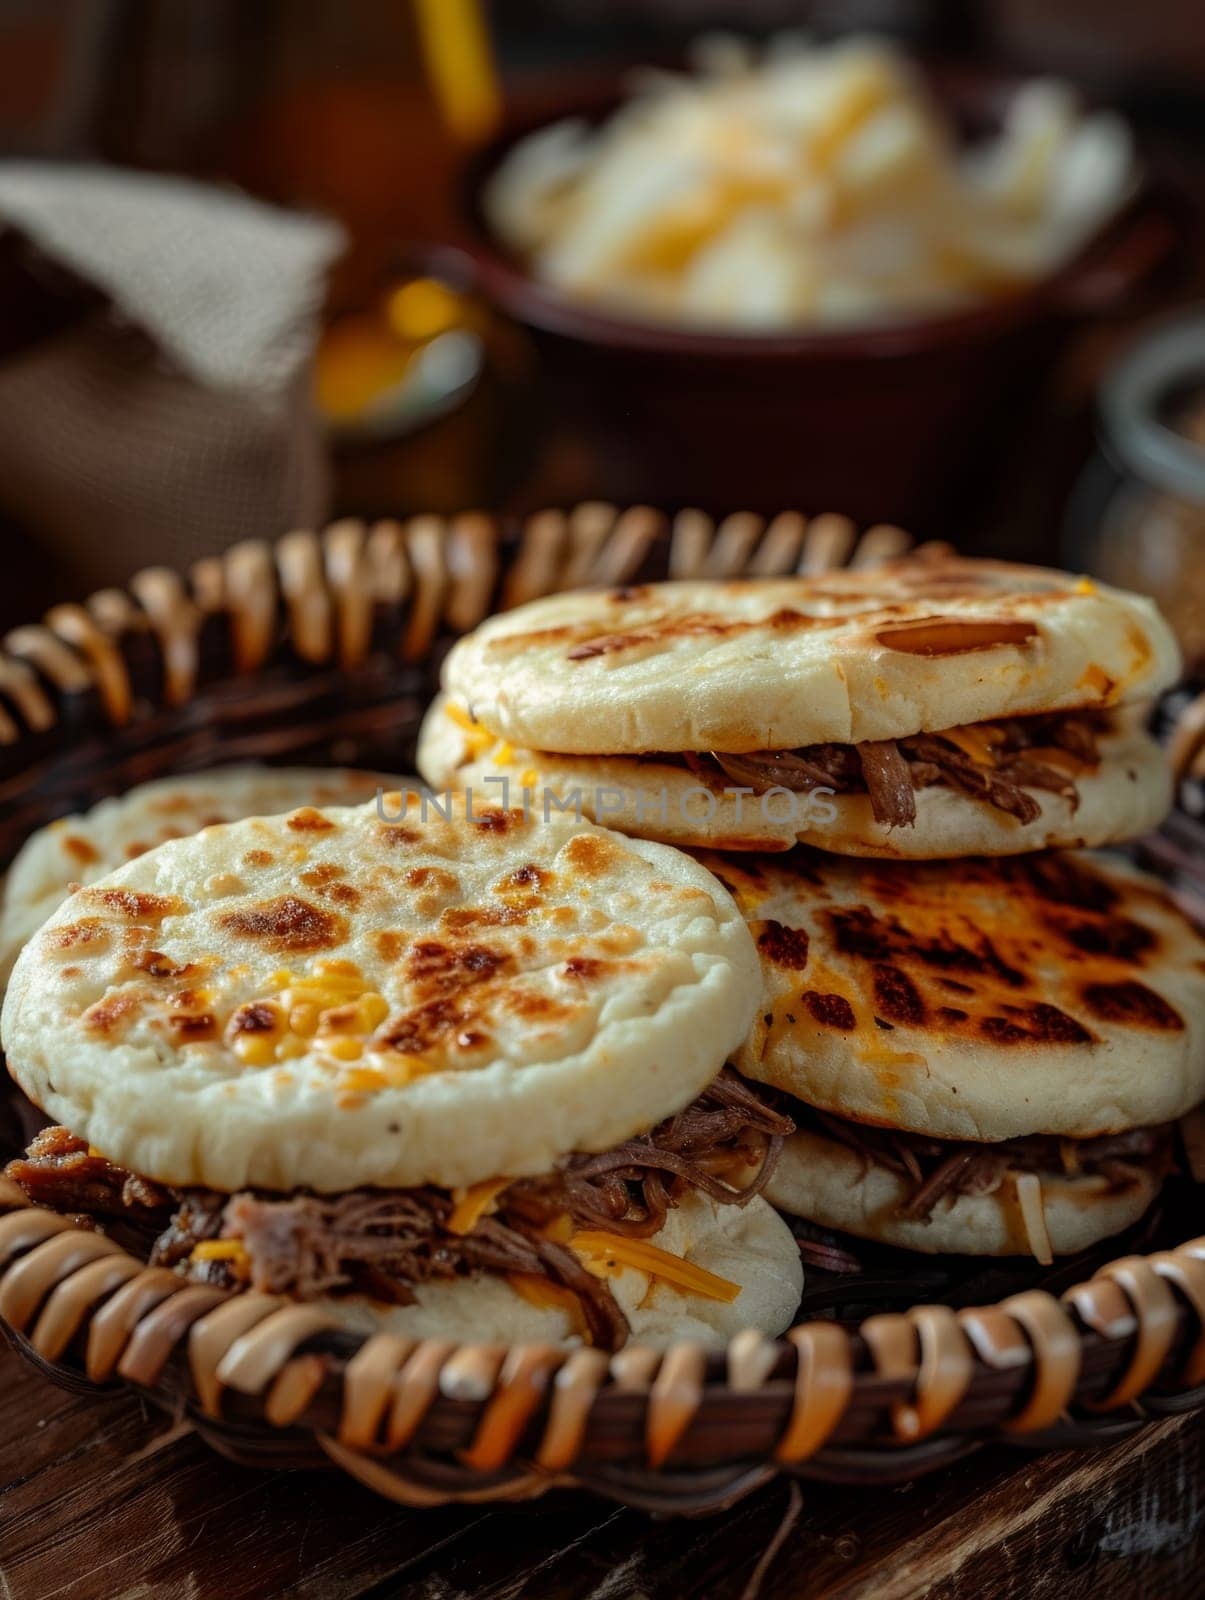 Authentic Venezuelan arepas, freshly made cornmeal cakes stuffed with a variety of savory fillings like cheese, pulled pork, or beans, presented in a woven basket